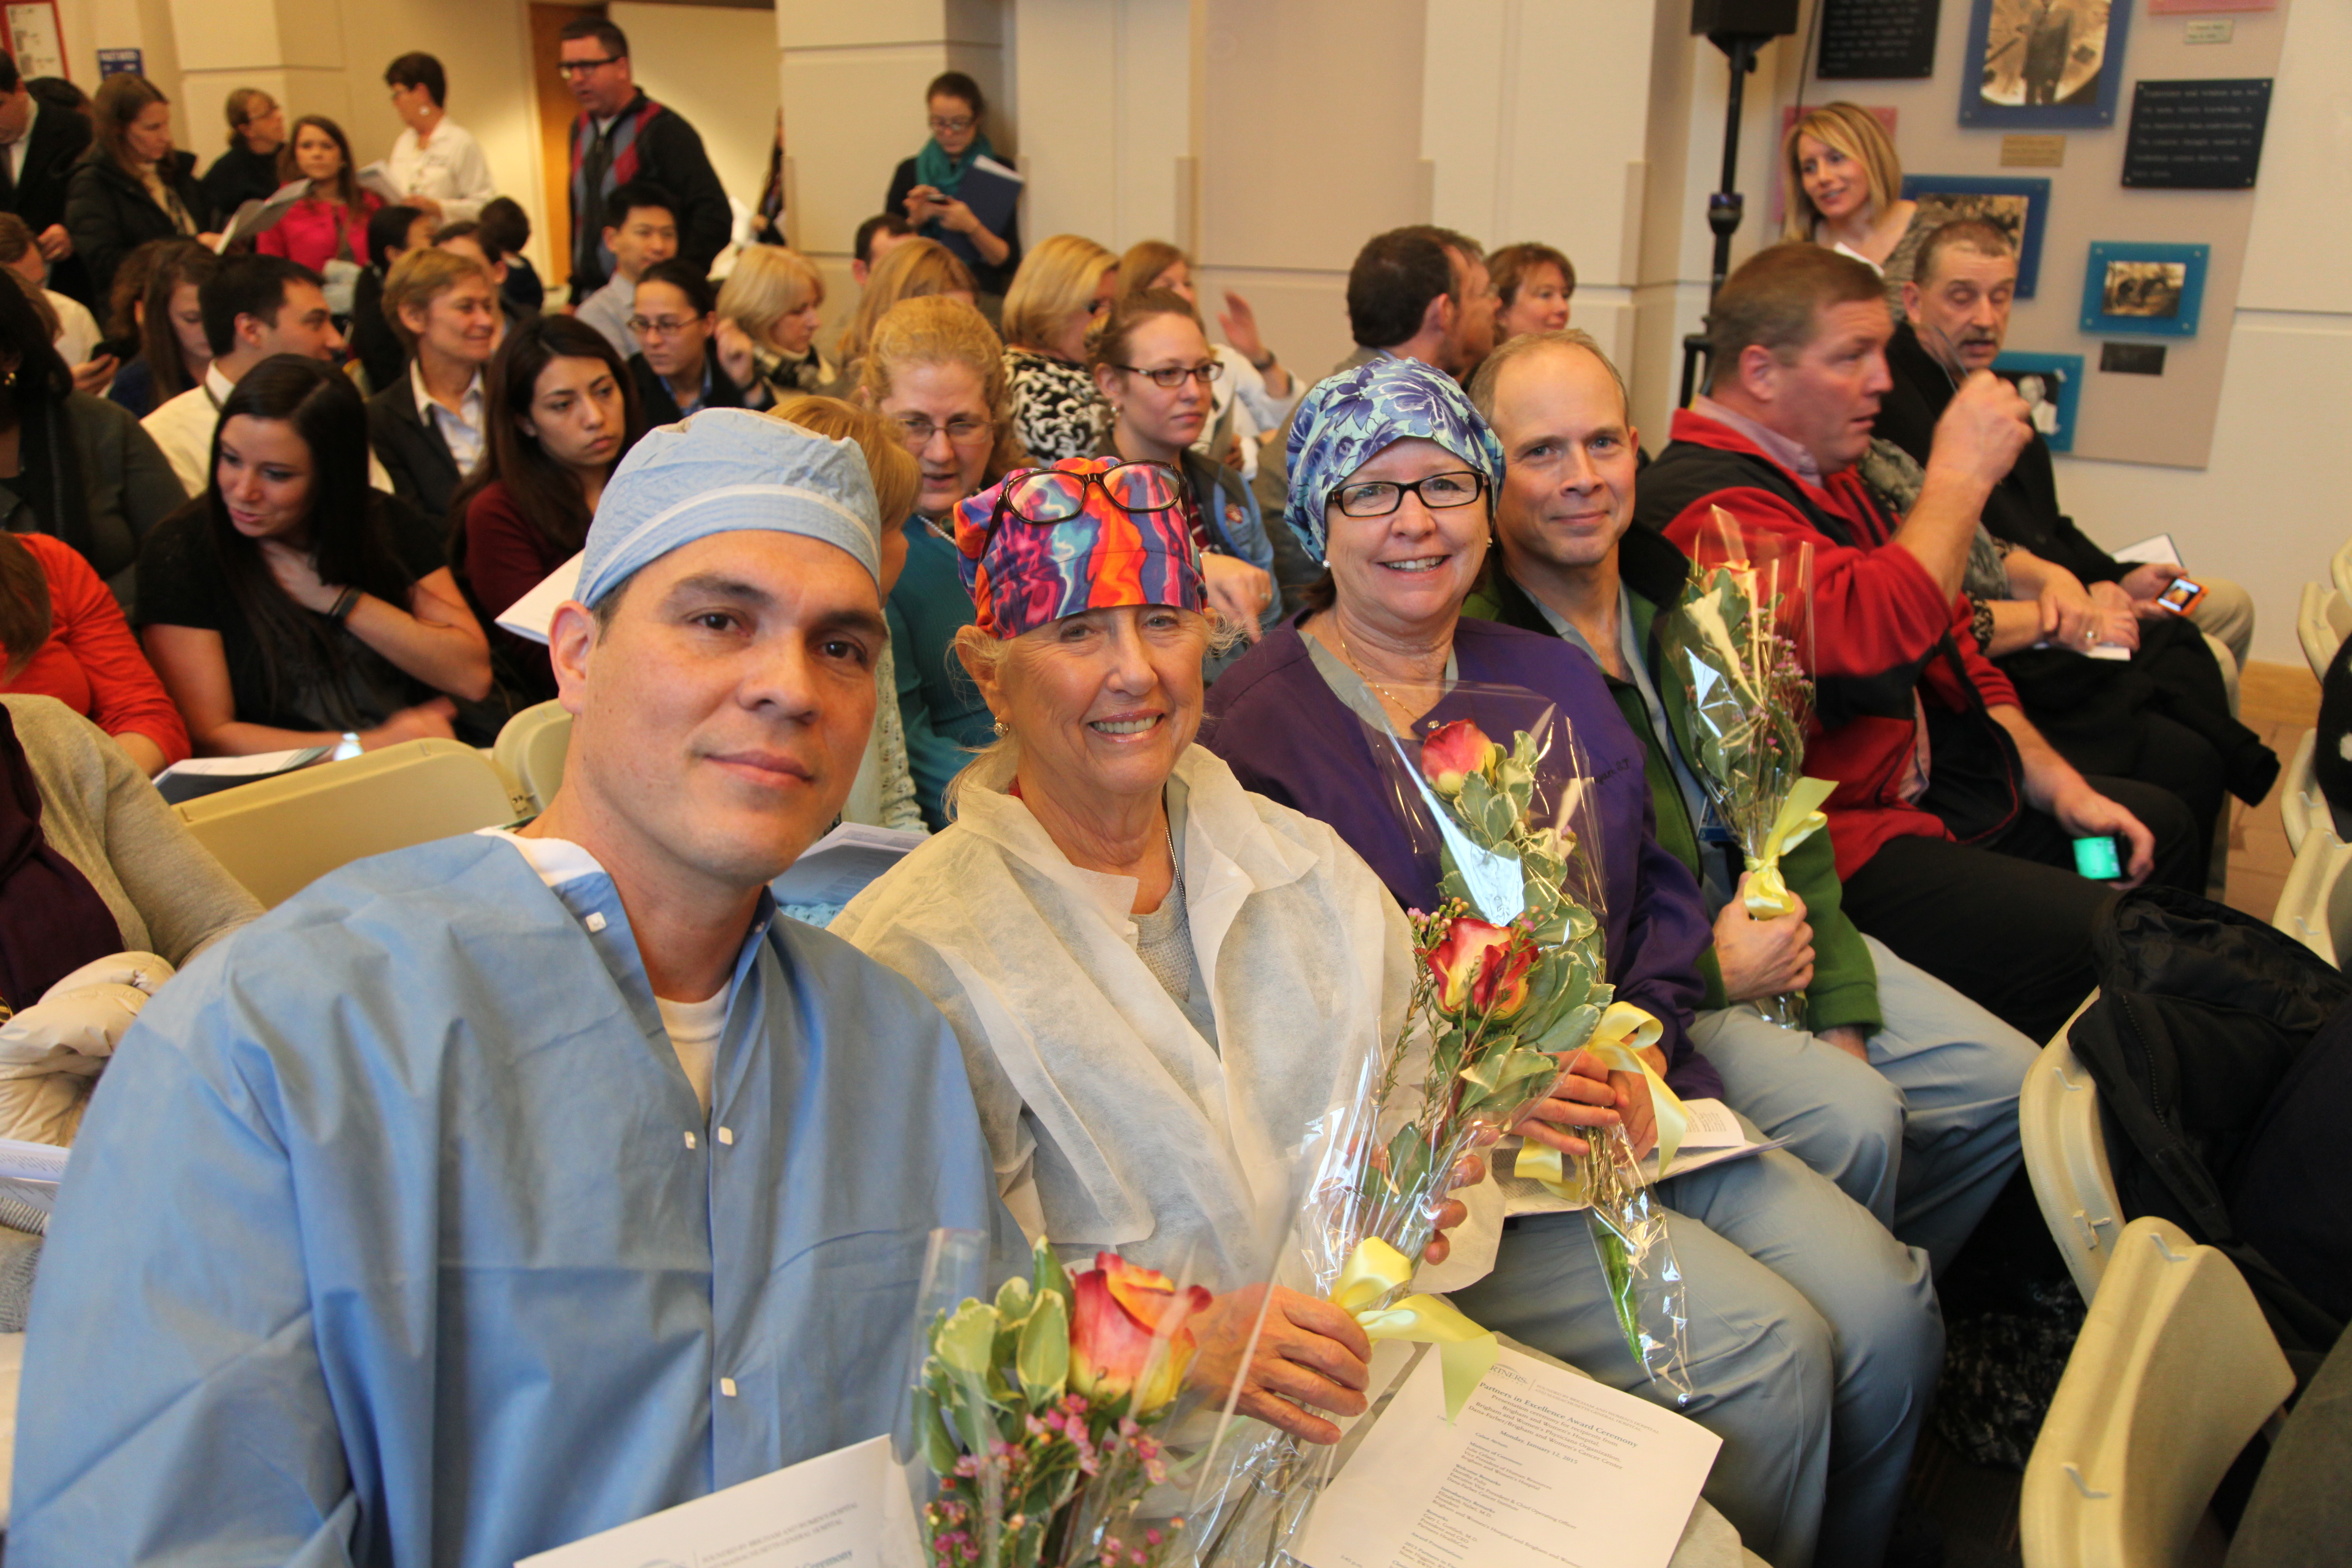 At left, from left: Diego Martinez, Donna Ward, Patty Bryan and Eugene Dziedzic, of the Hybrid Interventional Obstetrical Surgery Team, which received a PIE award. At right: PIE award recipient Ciola Bennett, of BWH Care Coordination, poses with Partners President Gary Gottlieb and Betsy Nabel.